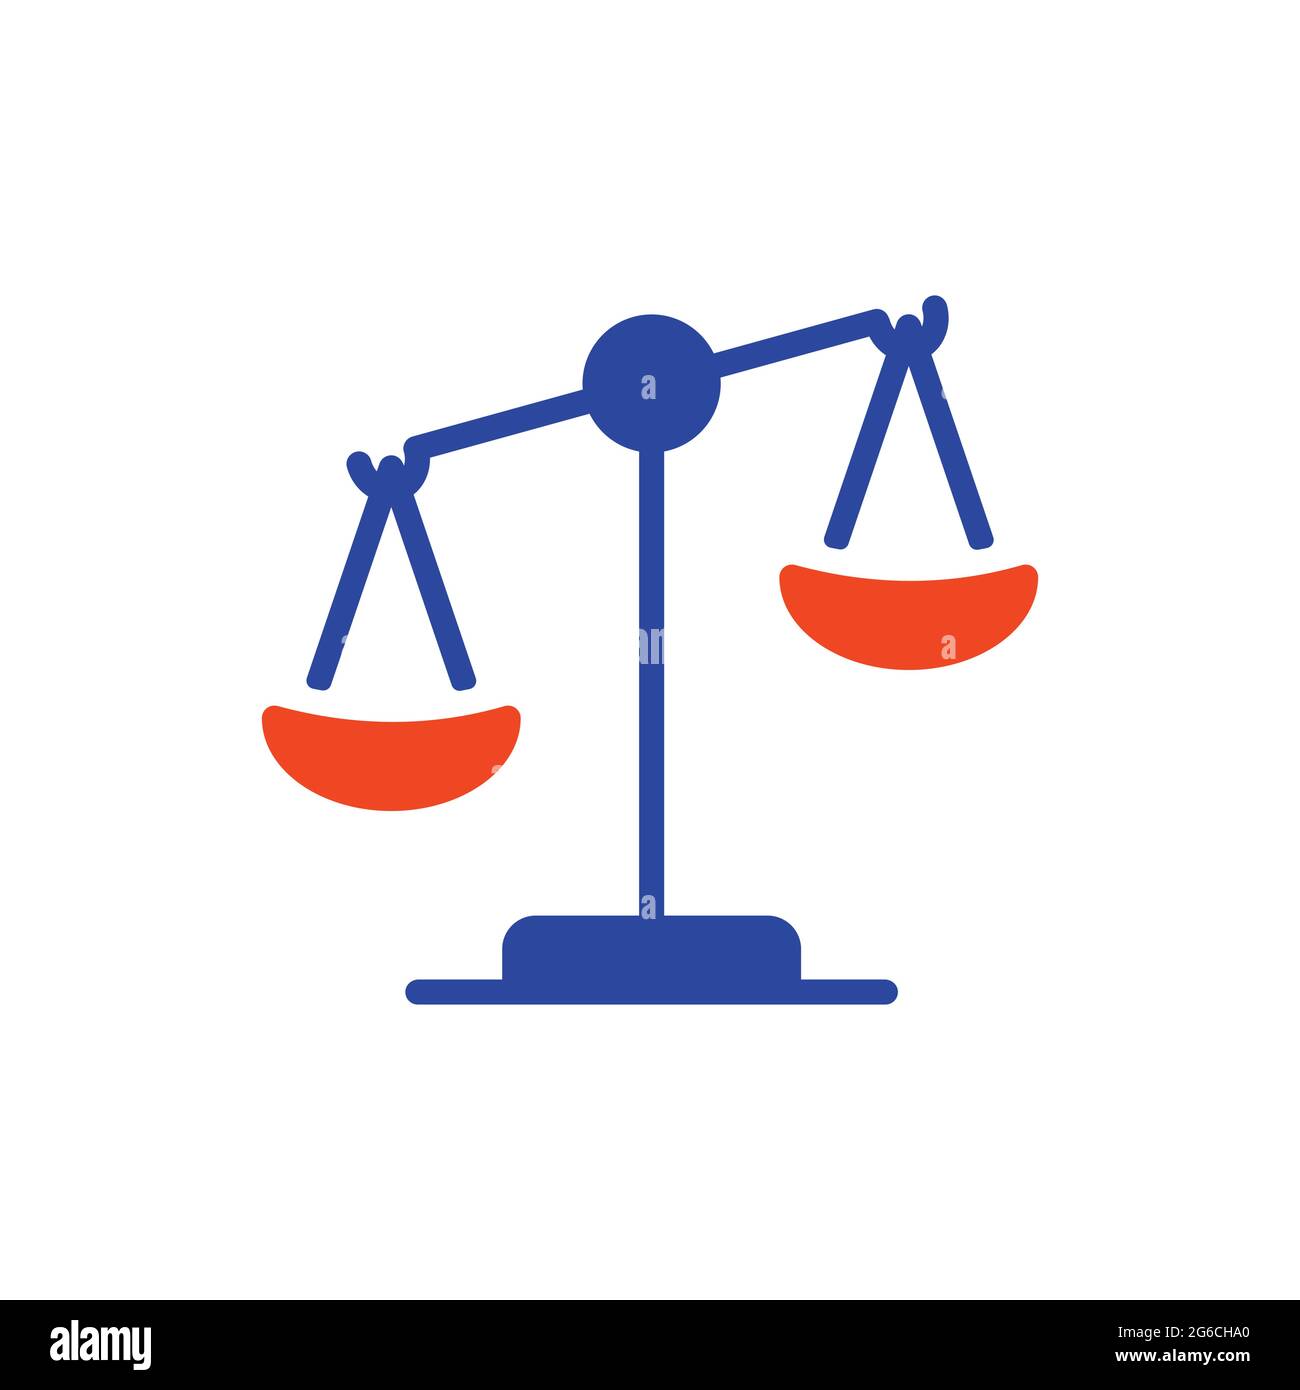 https://c8.alamy.com/comp/2G6CHA0/law-scale-vector-glyph-icon-justice-outline-icon-graph-symbol-for-your-web-site-design-logo-app-ui-vector-illustration-eps10-2G6CHA0.jpg